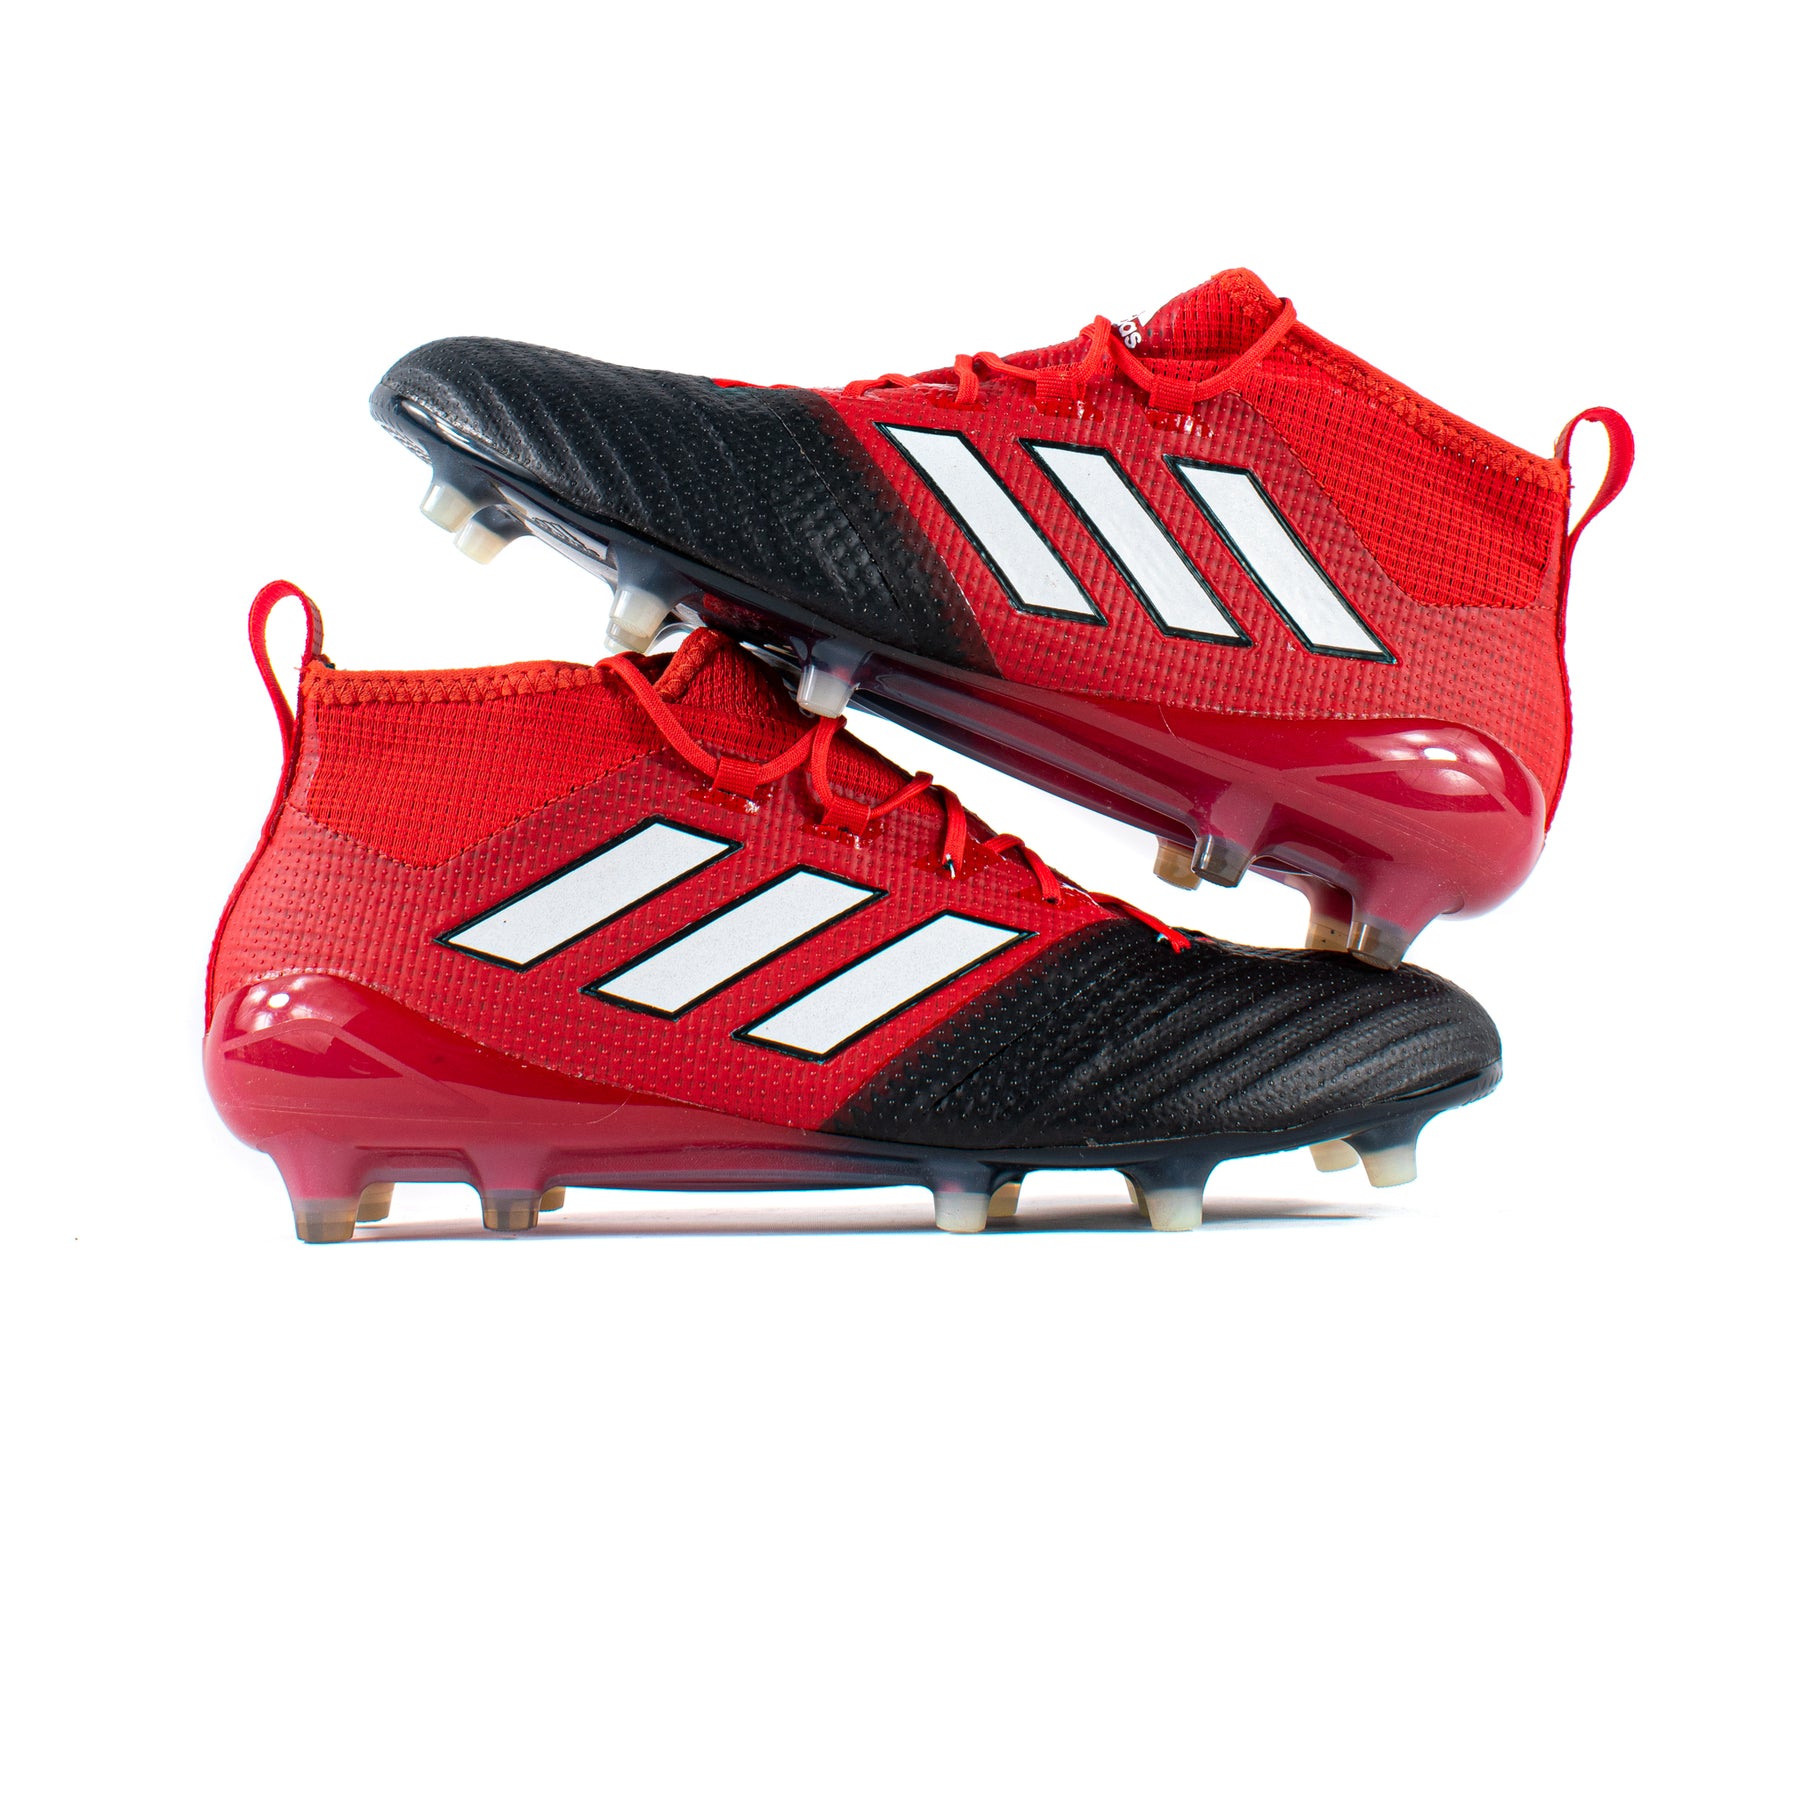 Ace 17.1 Black Red FG – Classic Cleats